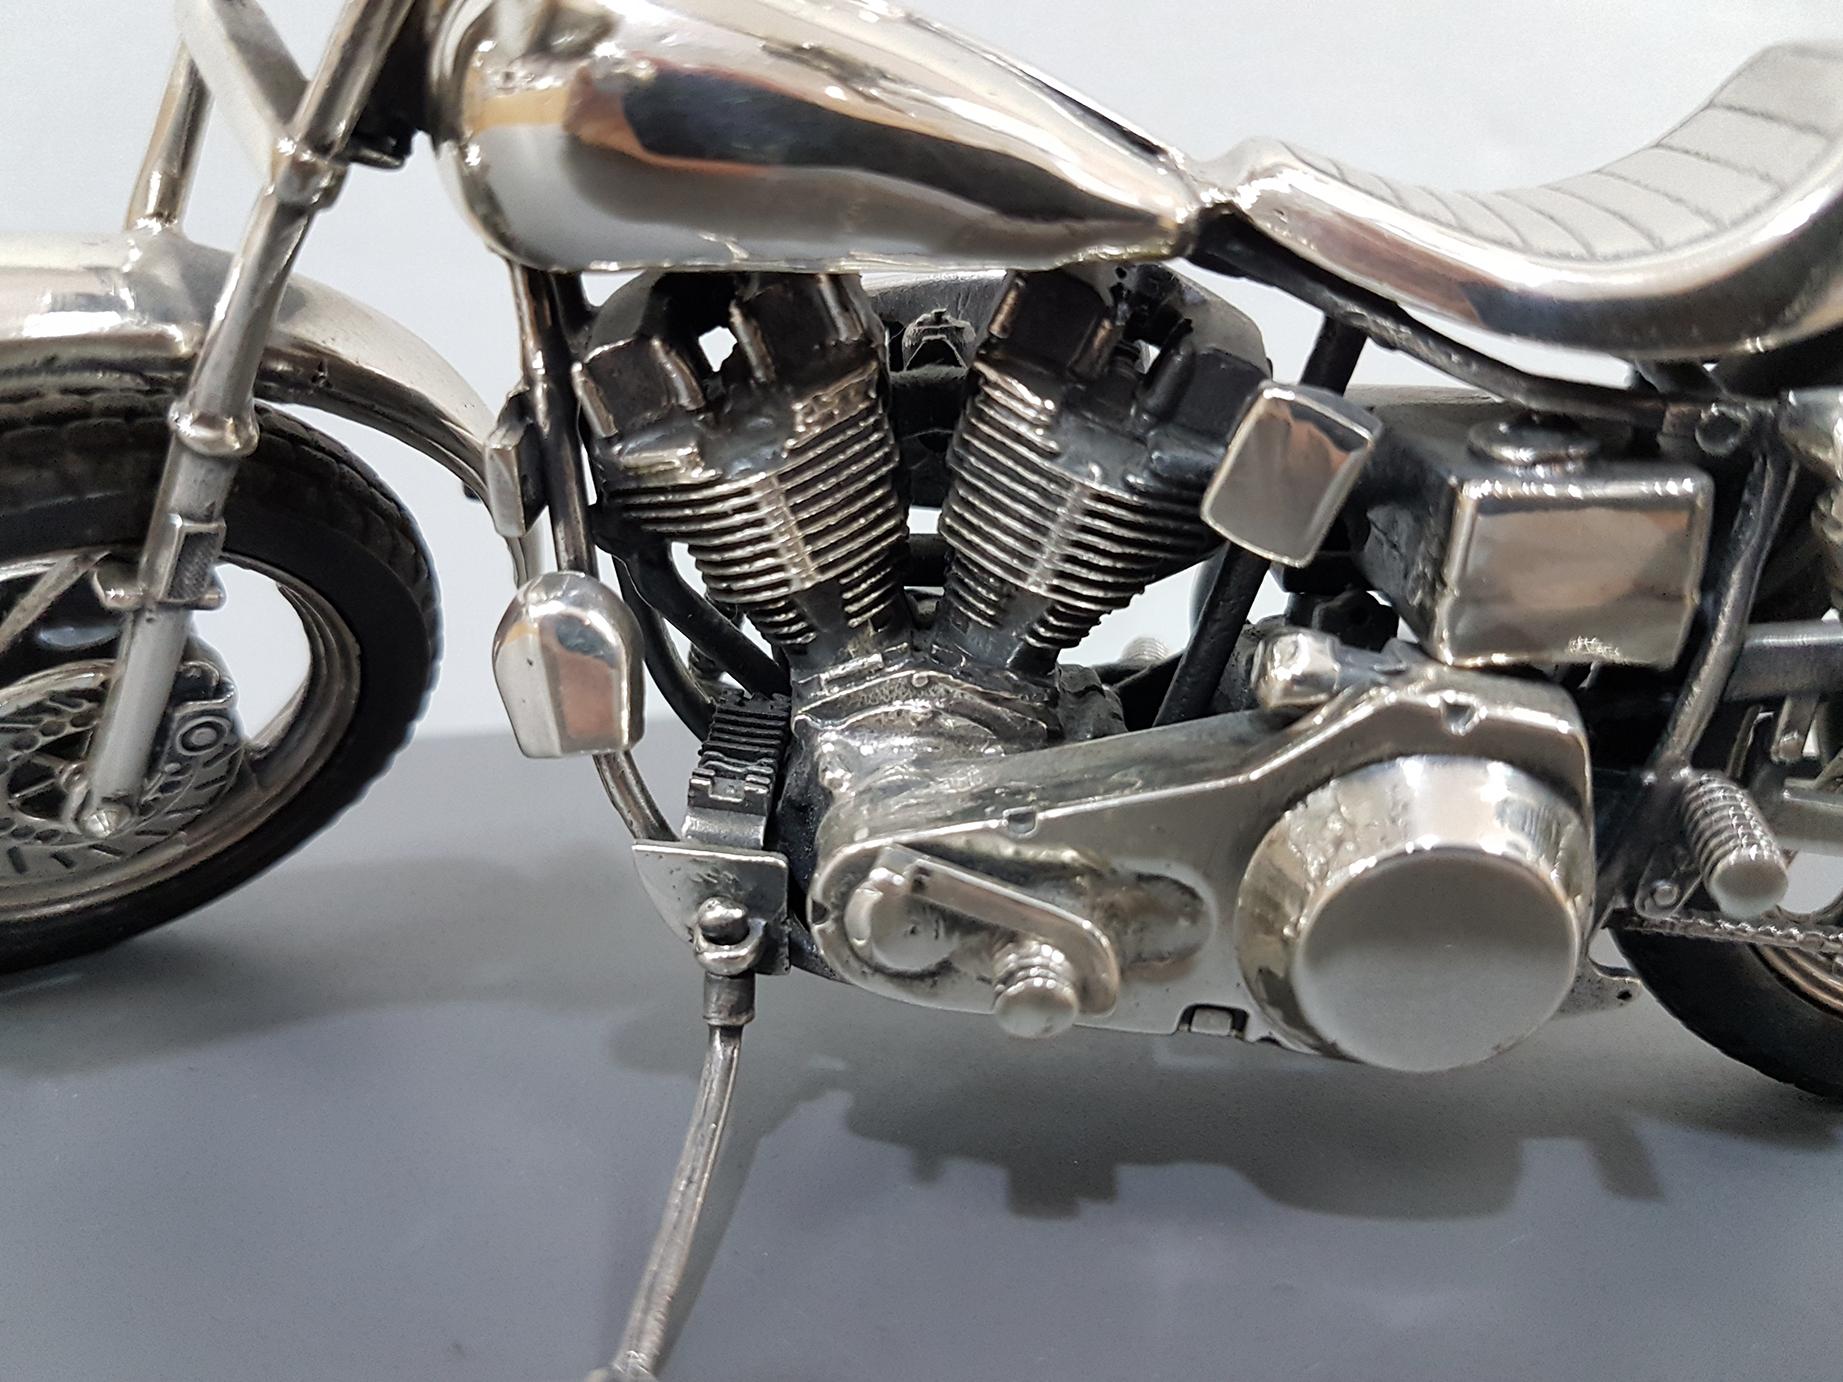 Vintage Harley Davidson motorcycle in sterling silver with very accurate detail reproduction.
The first is a Harley Davidson FXSB low rider 1340 shovel head 
The wheels are with spokes and rubber tires
Completely handmade. Made in Italy
424